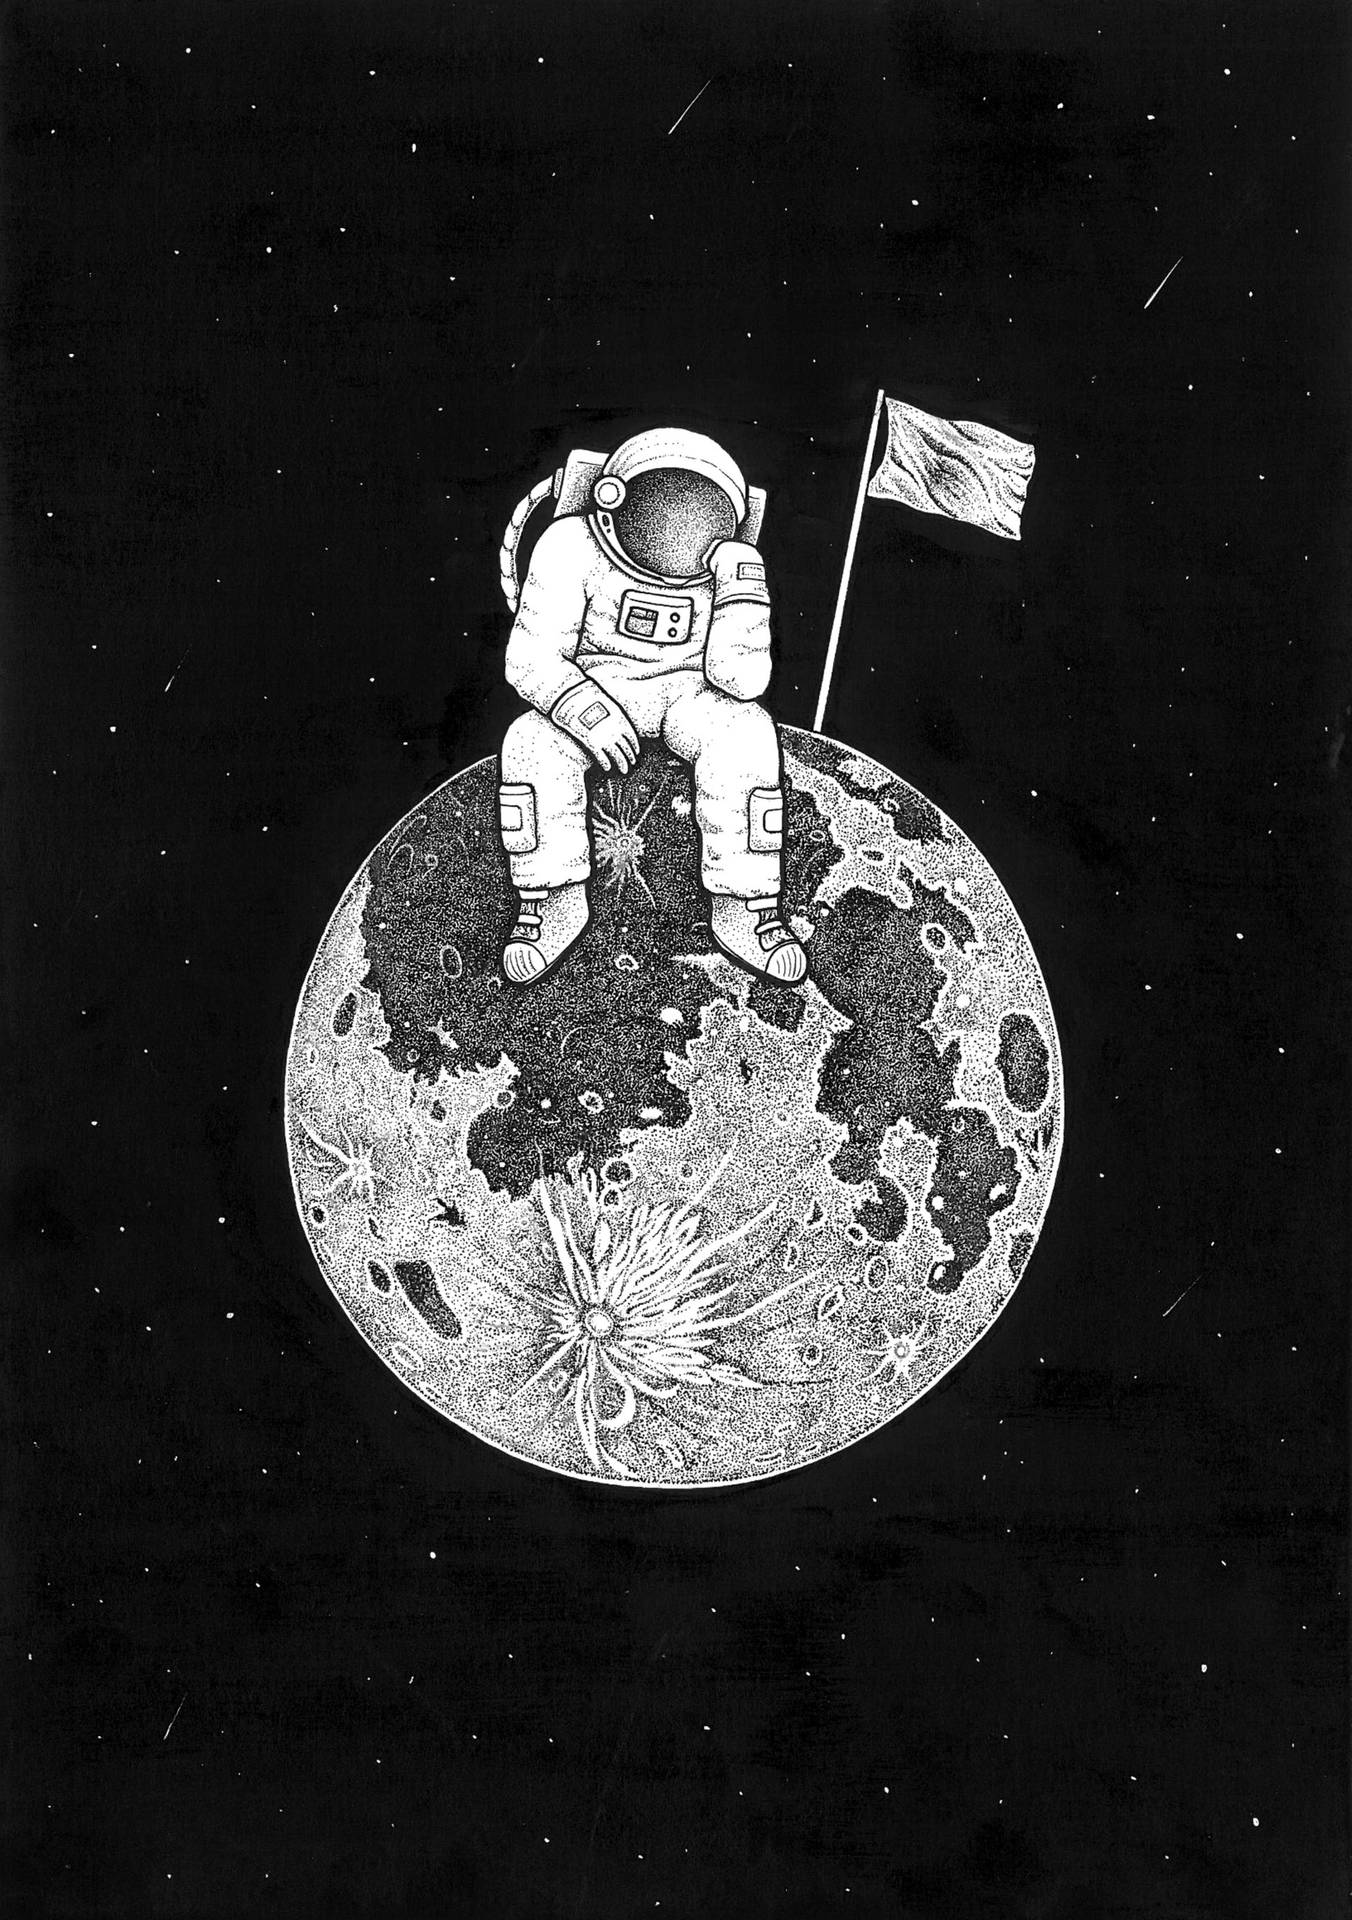 Black And White Astronaut Sitting On Planet Art Wallpaper